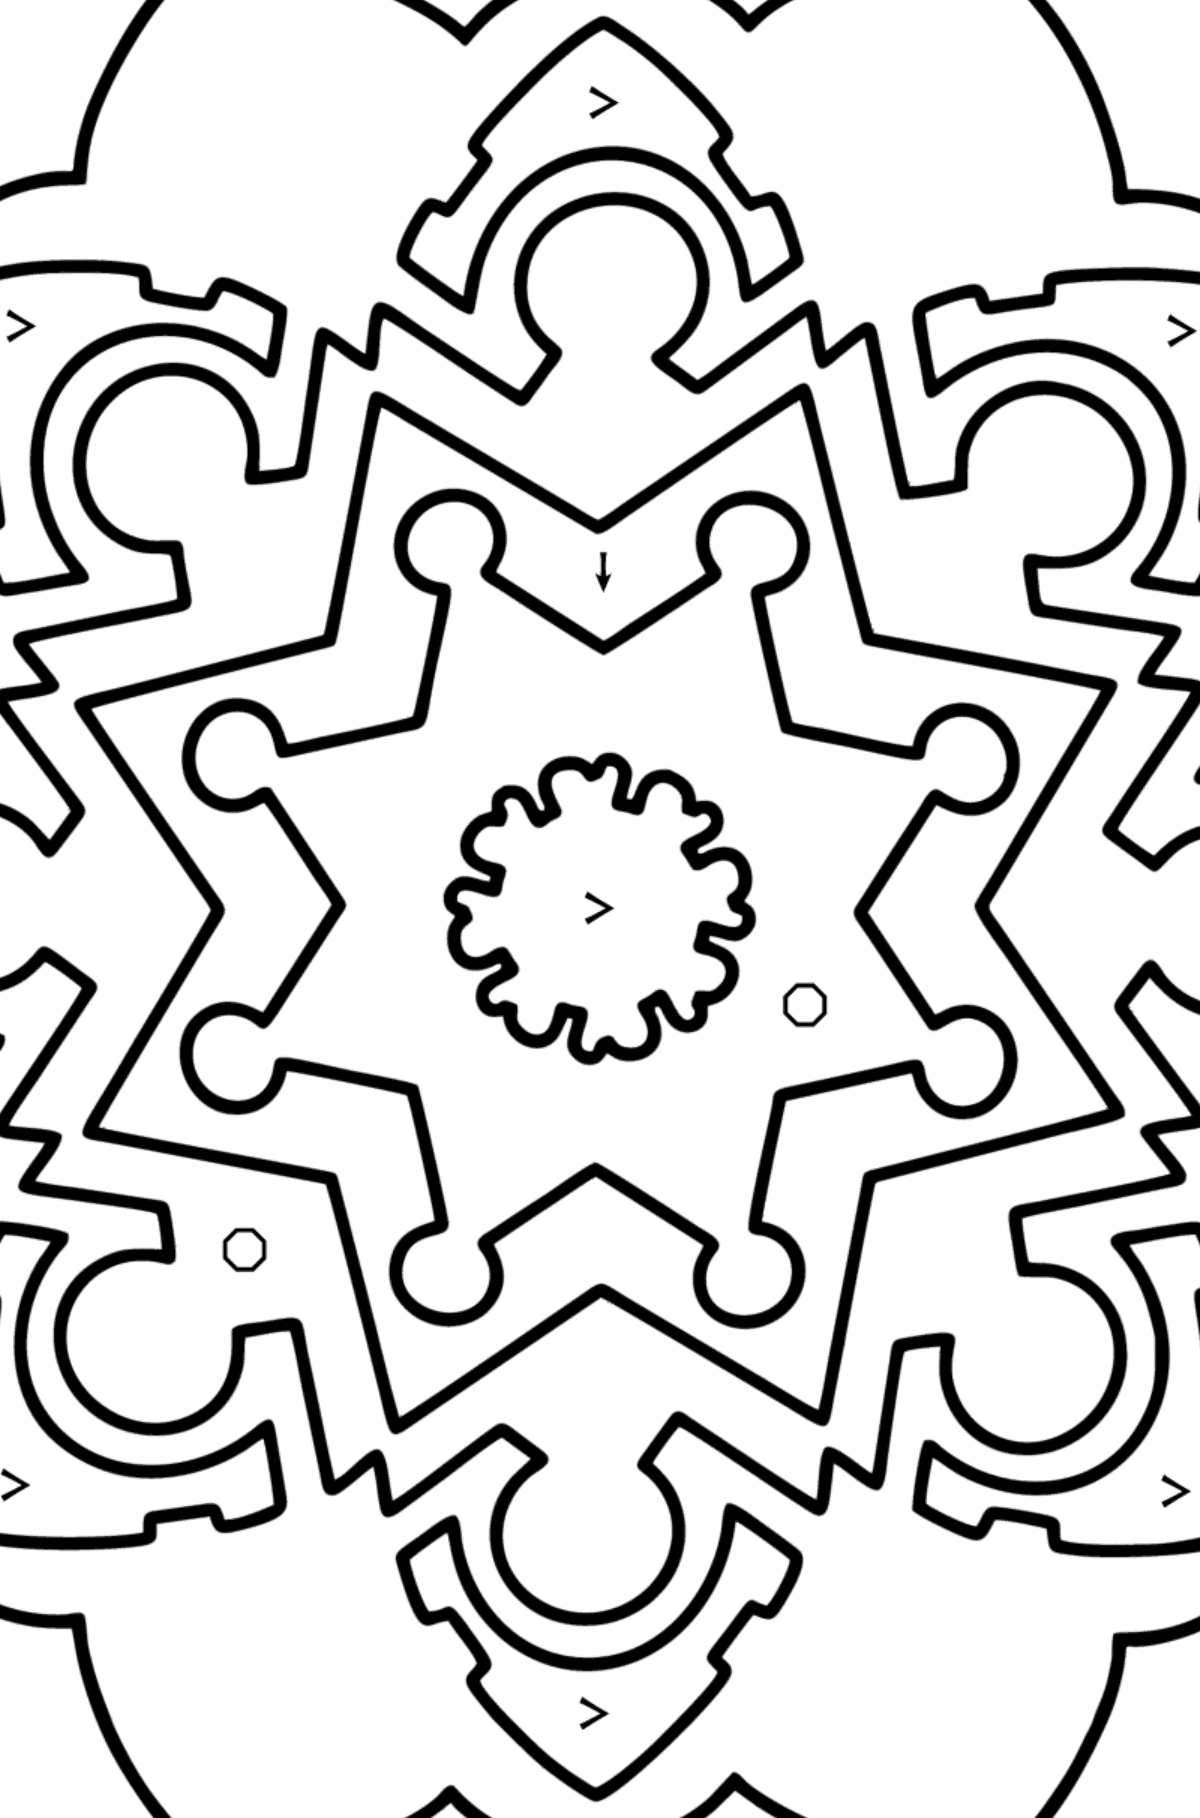 Mandala coloring page - 13 parts - Coloring by Symbols and Geometric Shapes for Kids